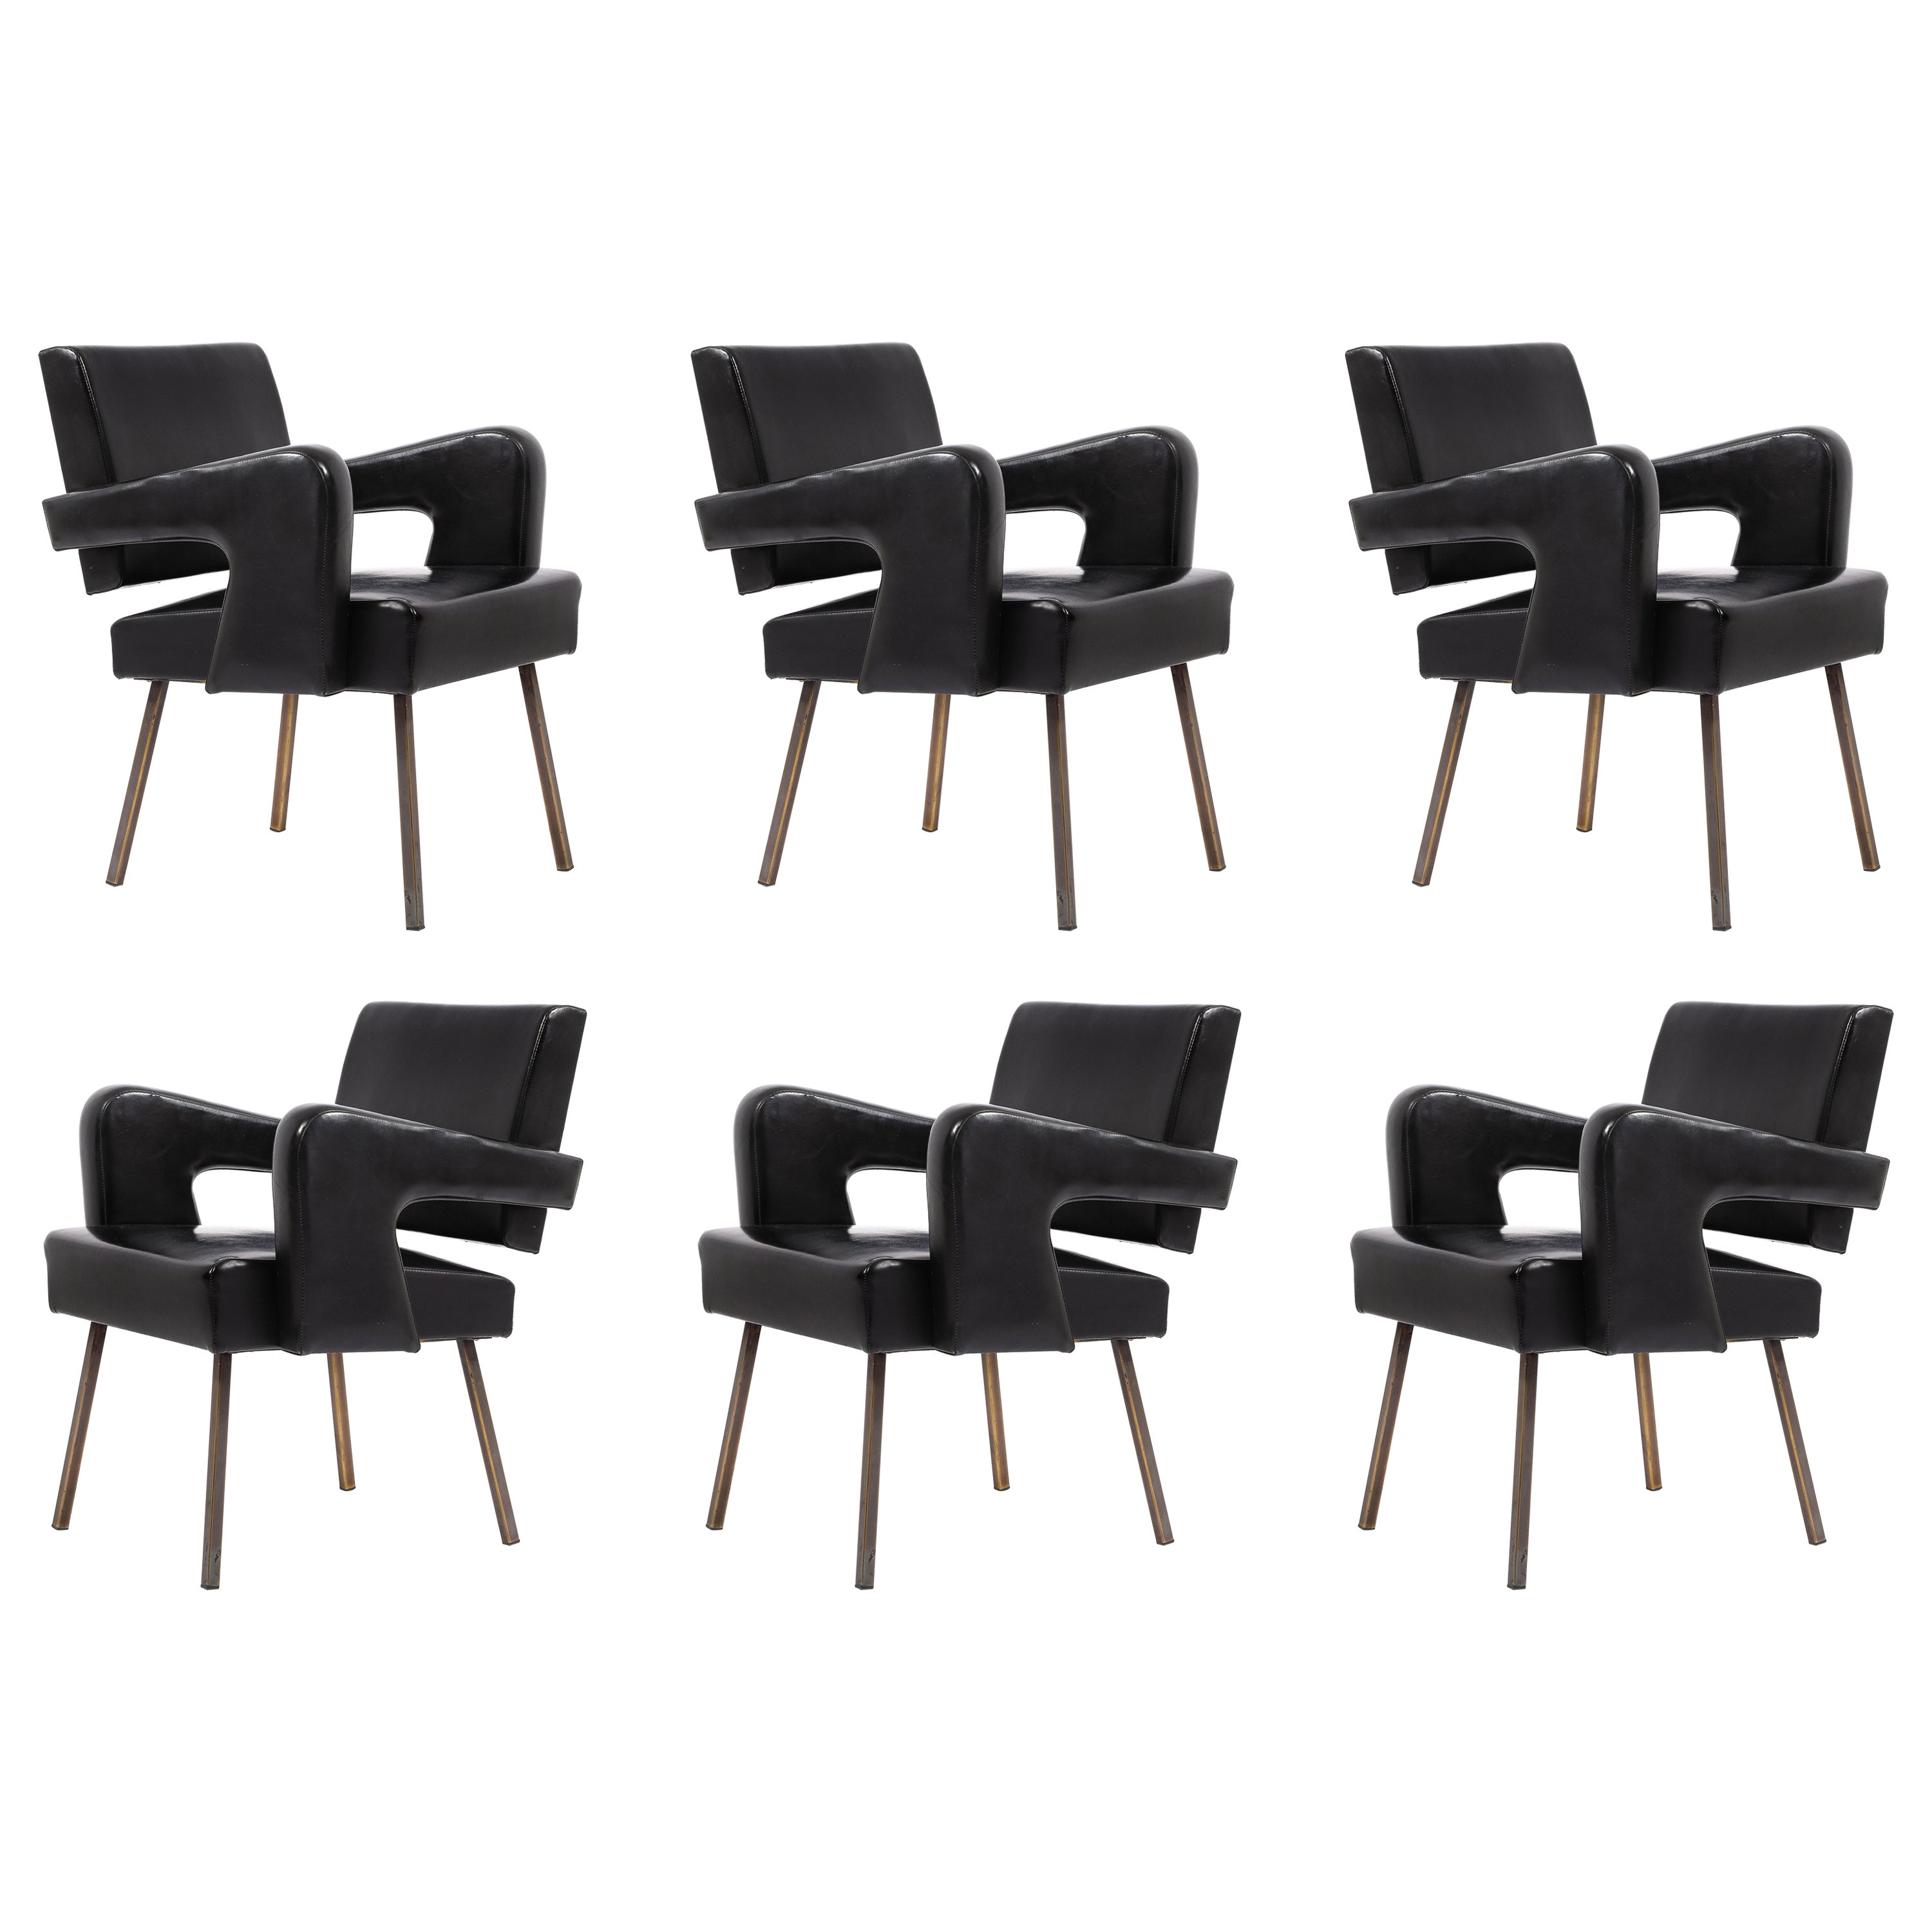 Jacques Adnet Black Vinyl & Brass Armchairs, France 1950's For Sale